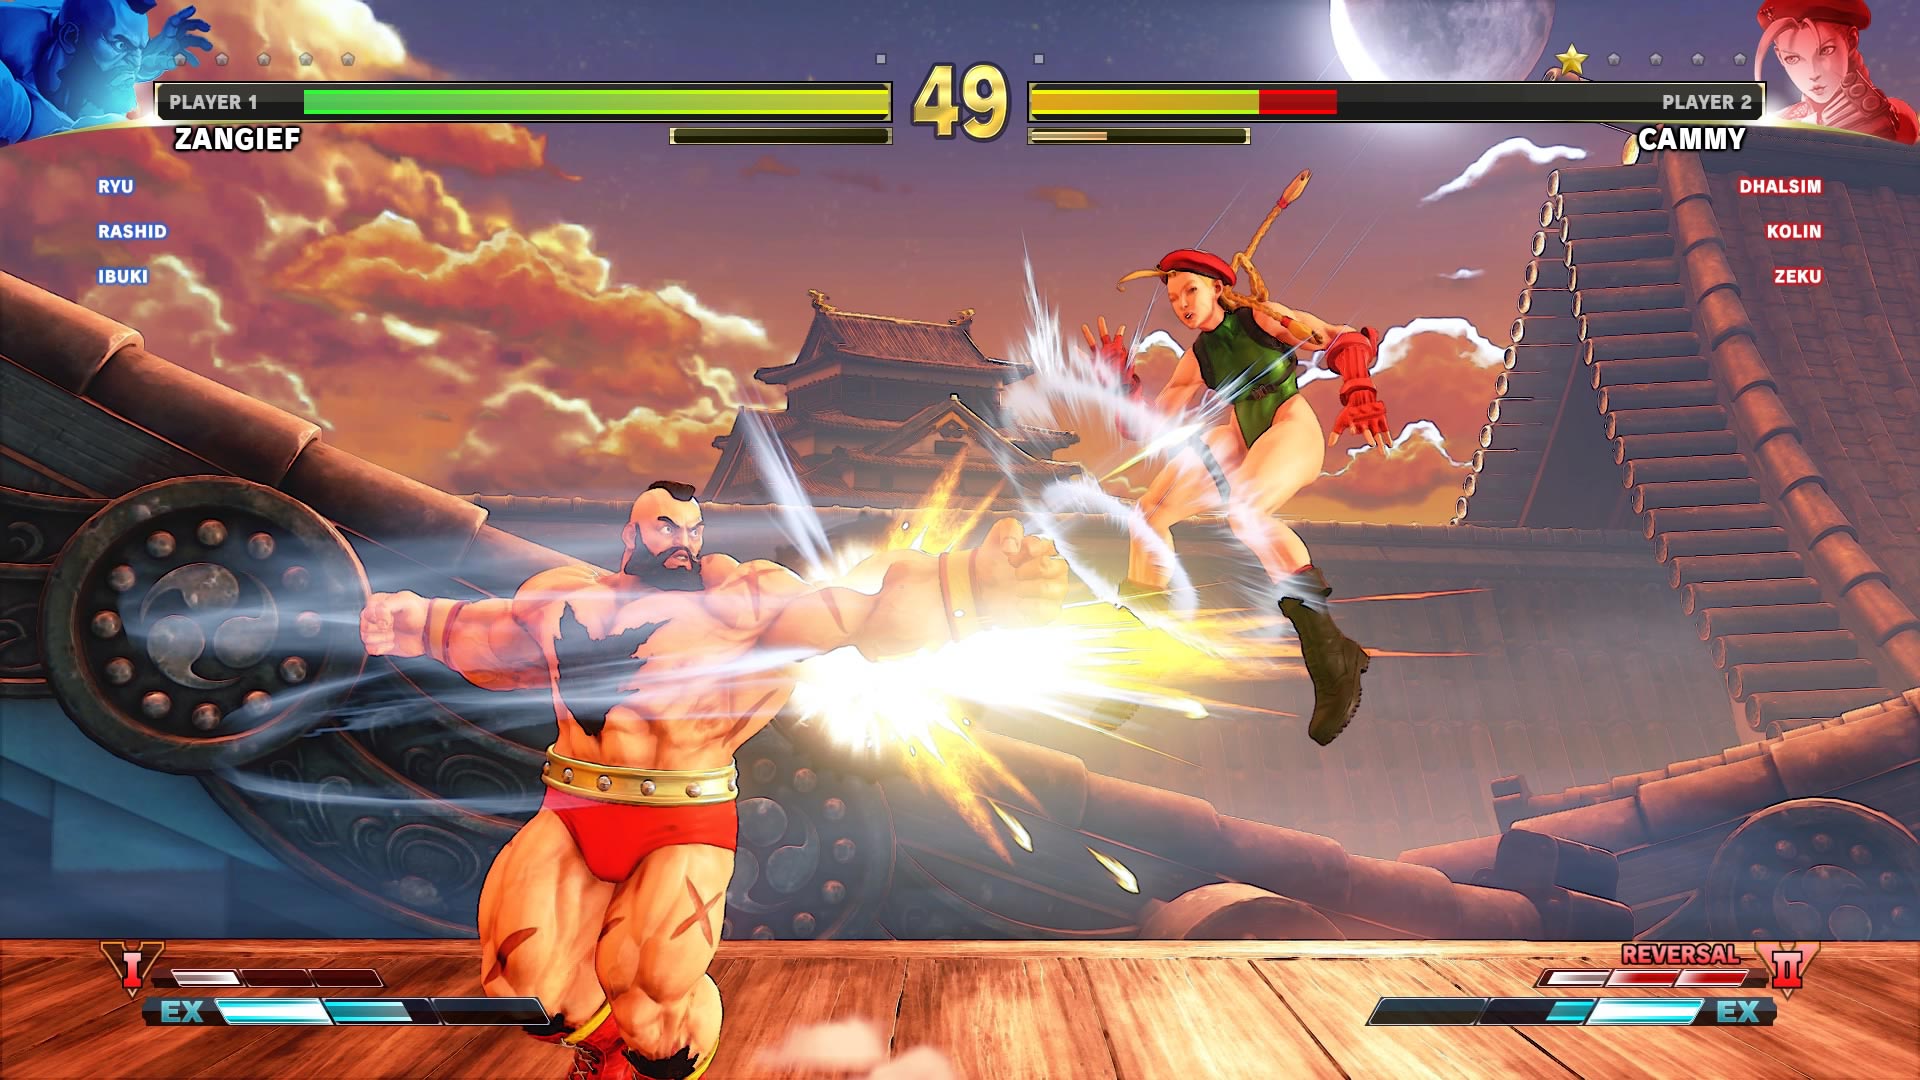 Street Fighter 5: Arcade Edition now available